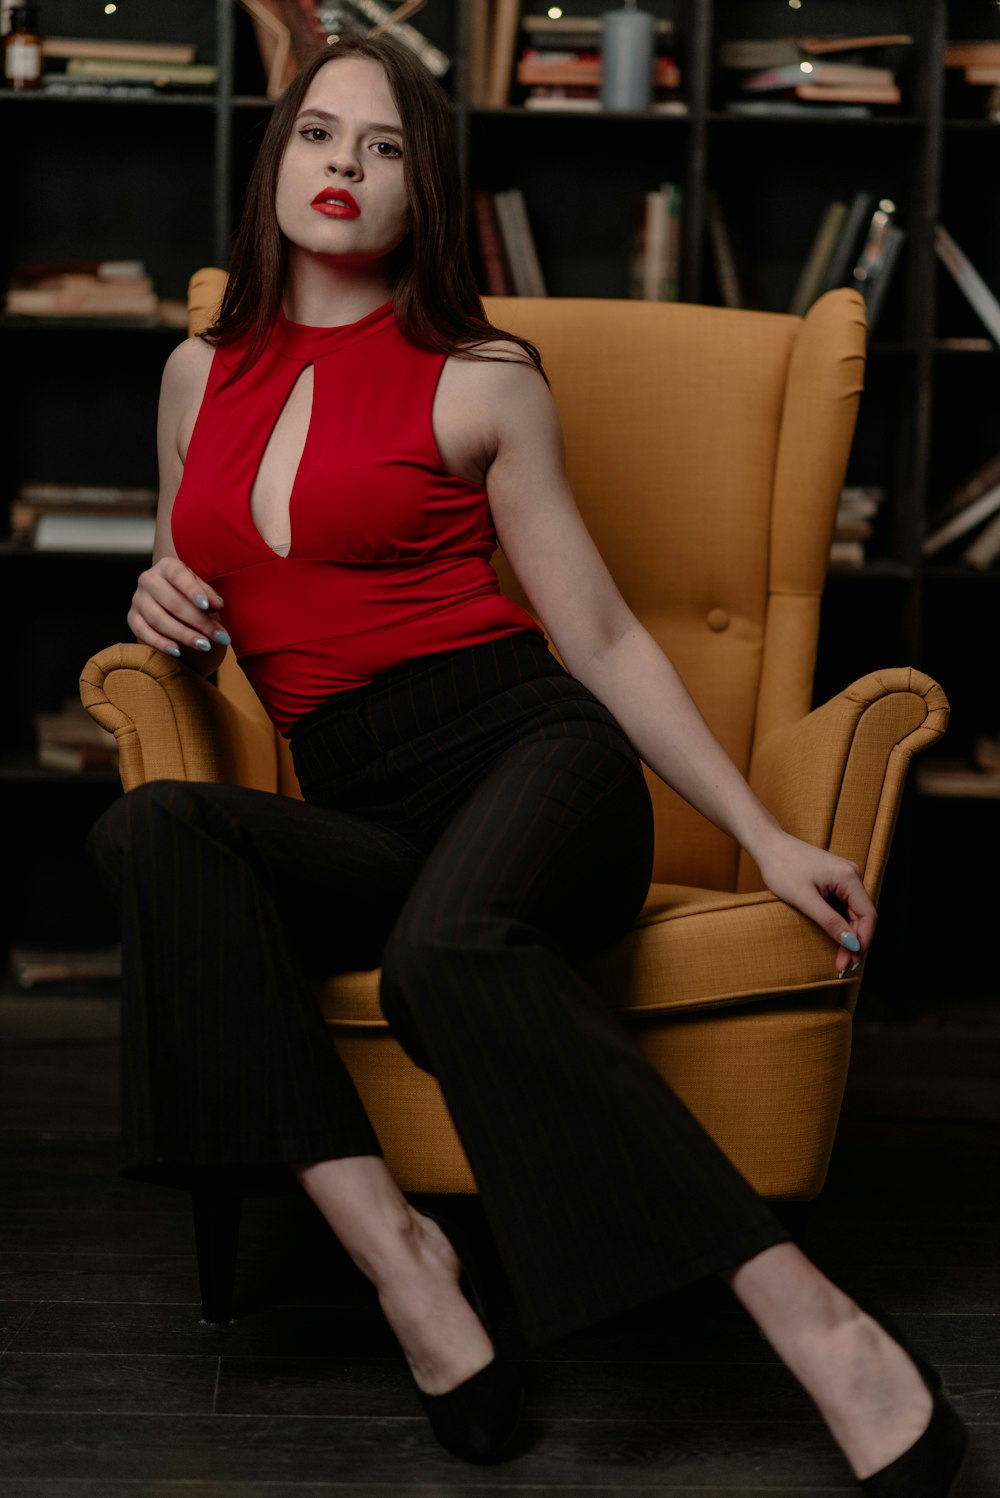 woman wearing red sleeveless top sitting on brown wingback chair